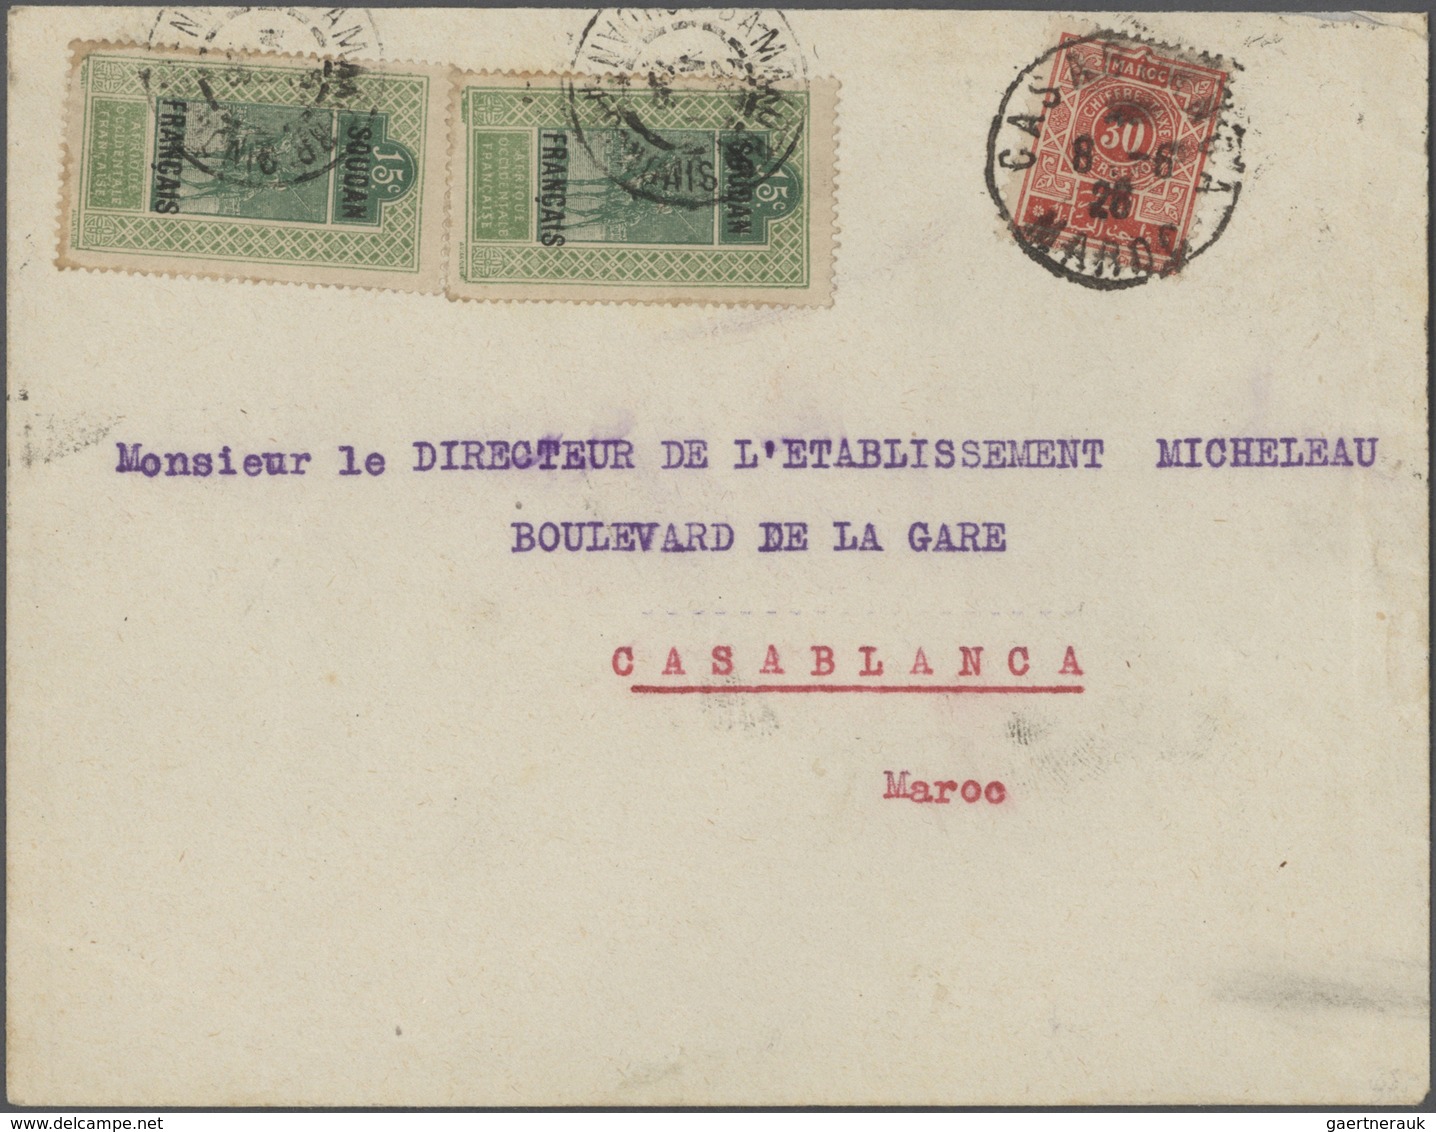 23586 Marokko: 1890/1970 (ca.), comprehensive collection with main value in the apprx. 340 covers/cards/st